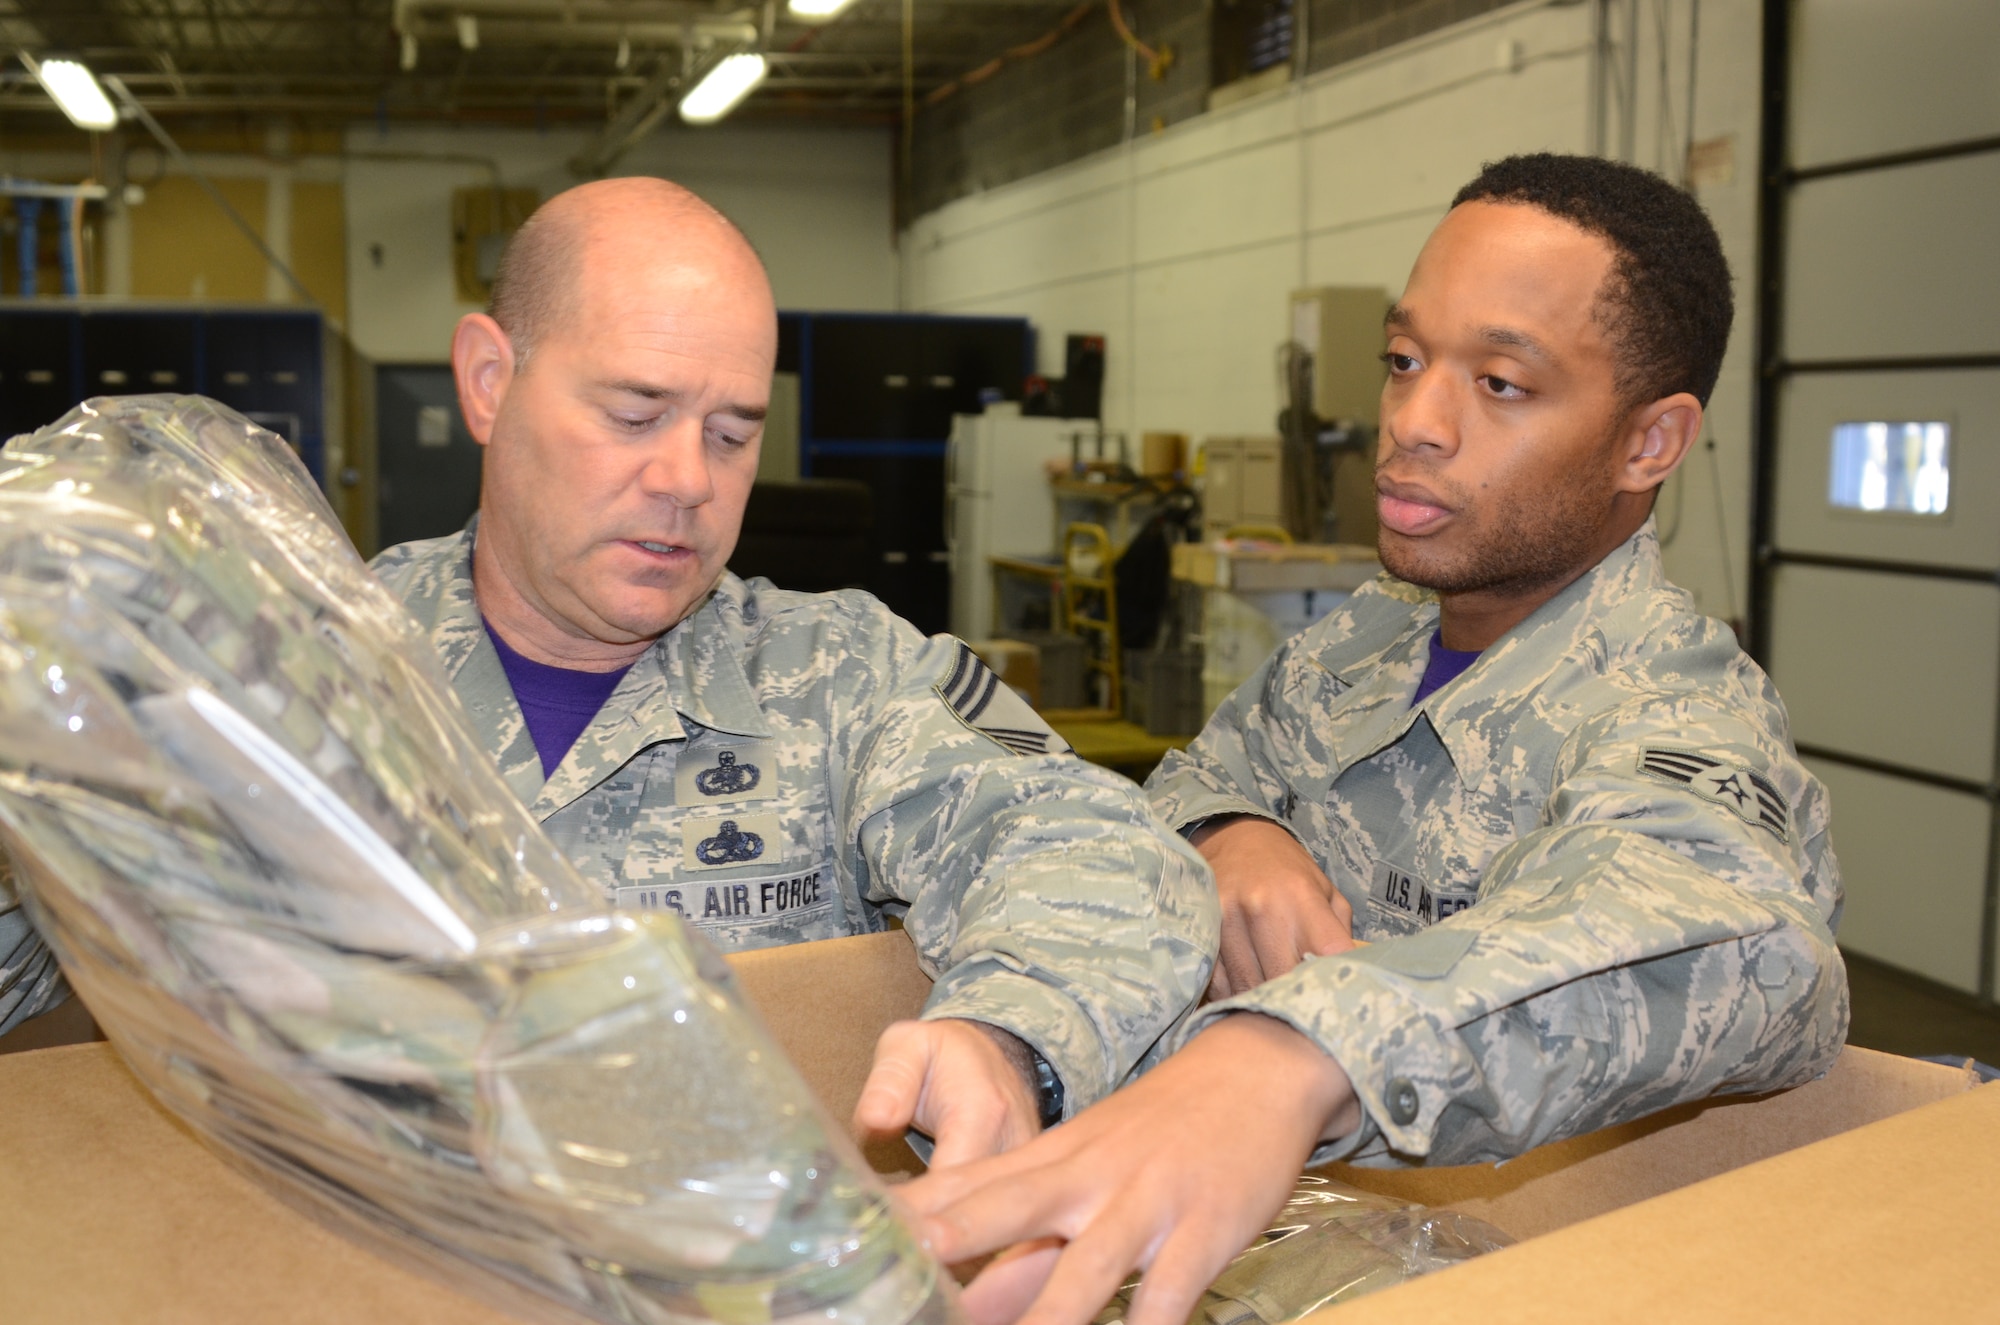 Chief Master Sgt.David Liberto, right, and Senior Airman William Greene IV, both of whom are assingned to the 175th Logistic Readiness Squadron, unpack new Air Force equipment at Warfield Air National Guard Base in Baltimore Dec. 4, 2015. Green, who processes inbound parcels for the entire base, was selected as the Spotlight Airman for the month of February in the Maryland Air National Guard. (U.S. Air National Guard photo by Tech. Sgt. David Speicher/RELEASED)